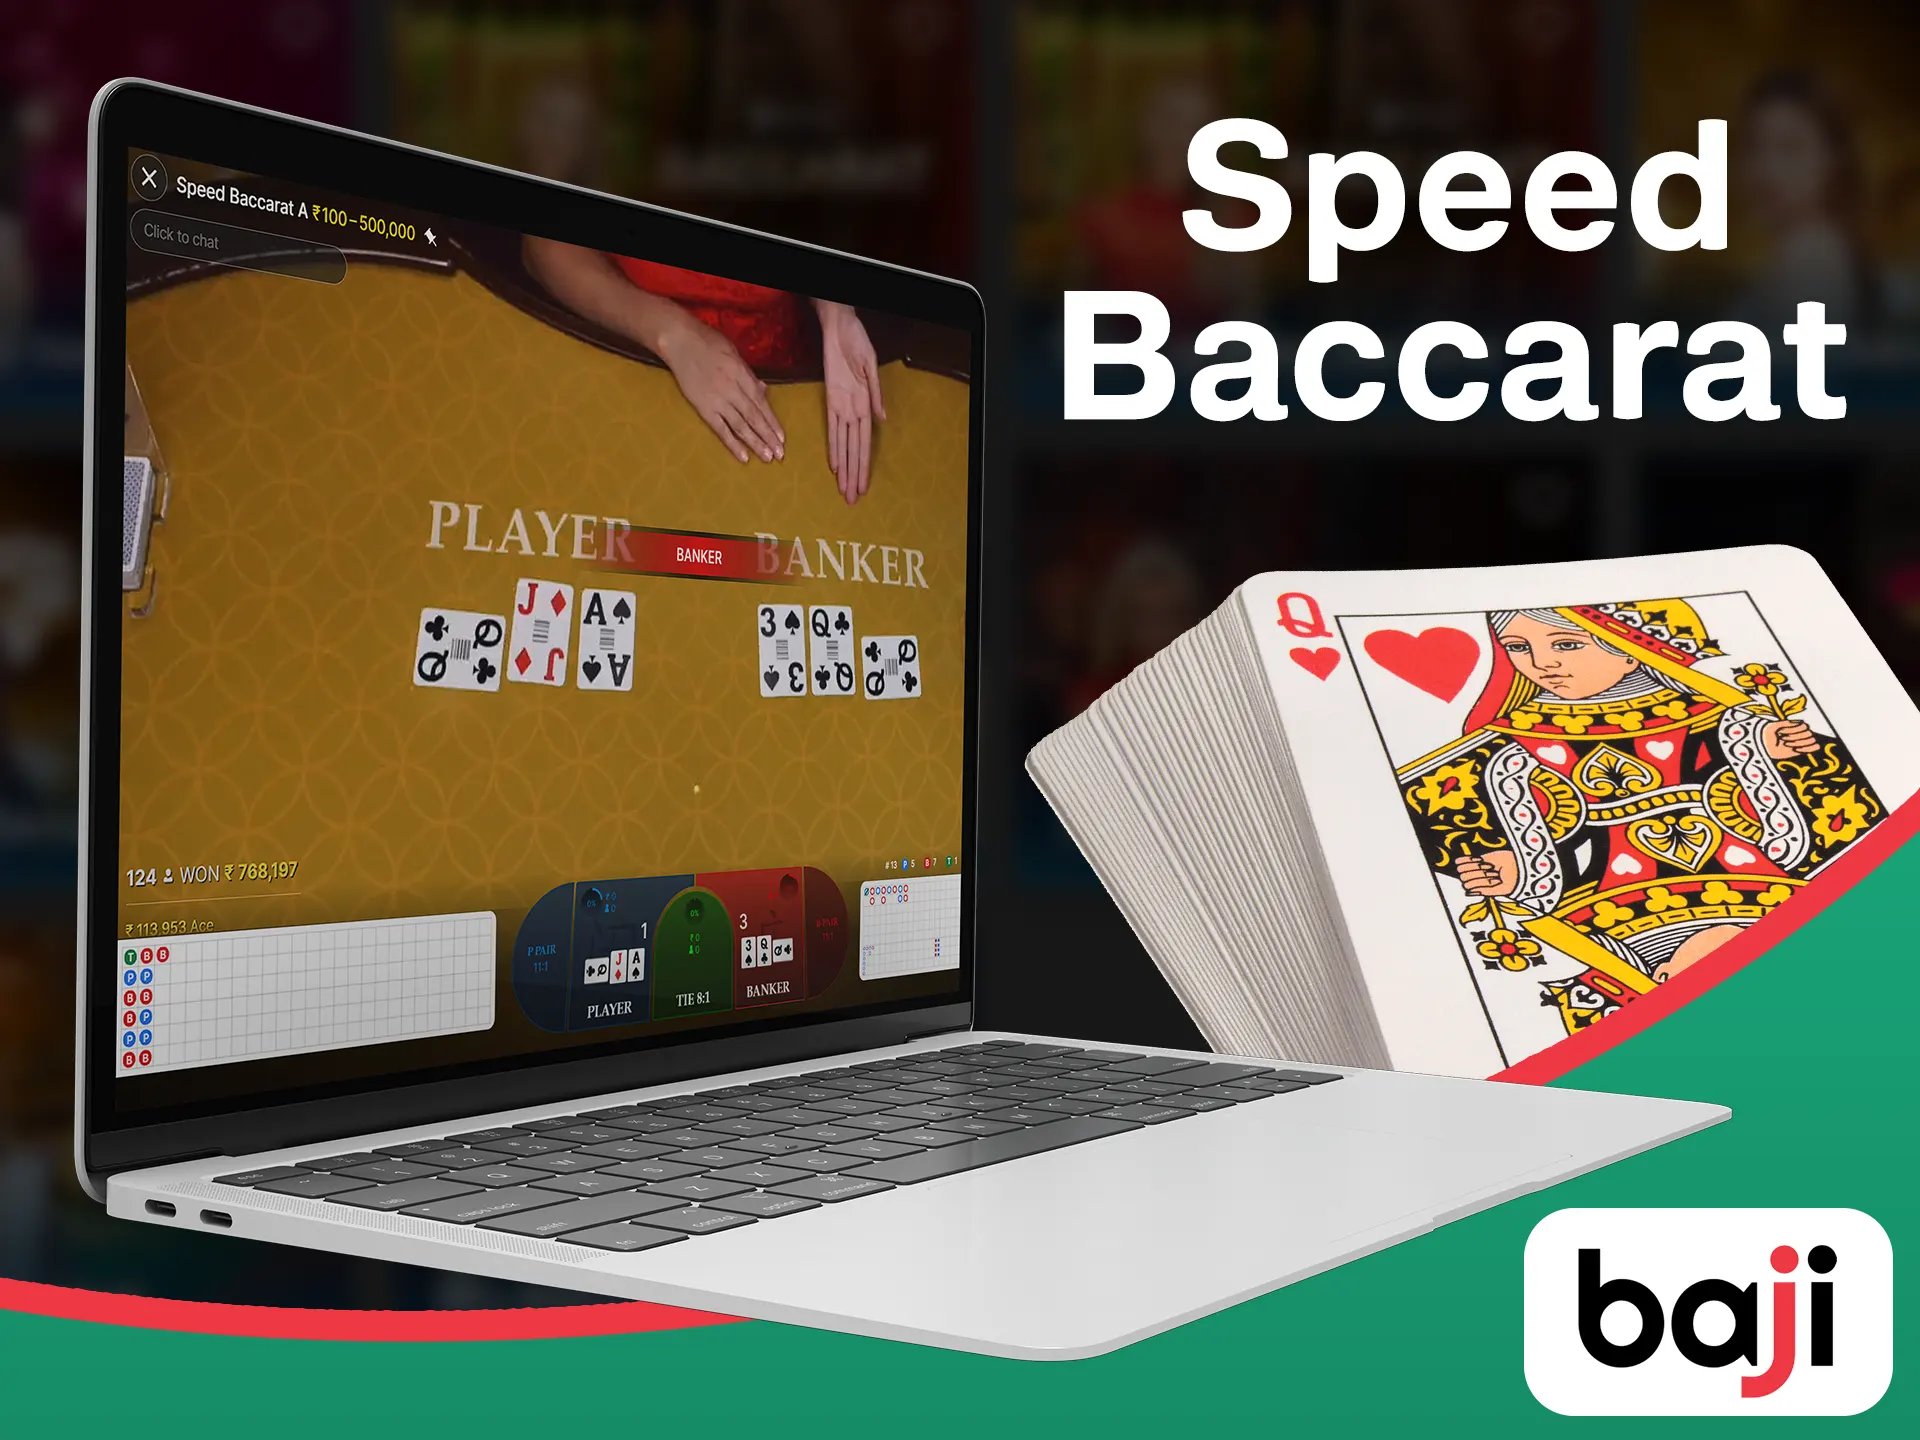 Play faster with the speed baccarat version.